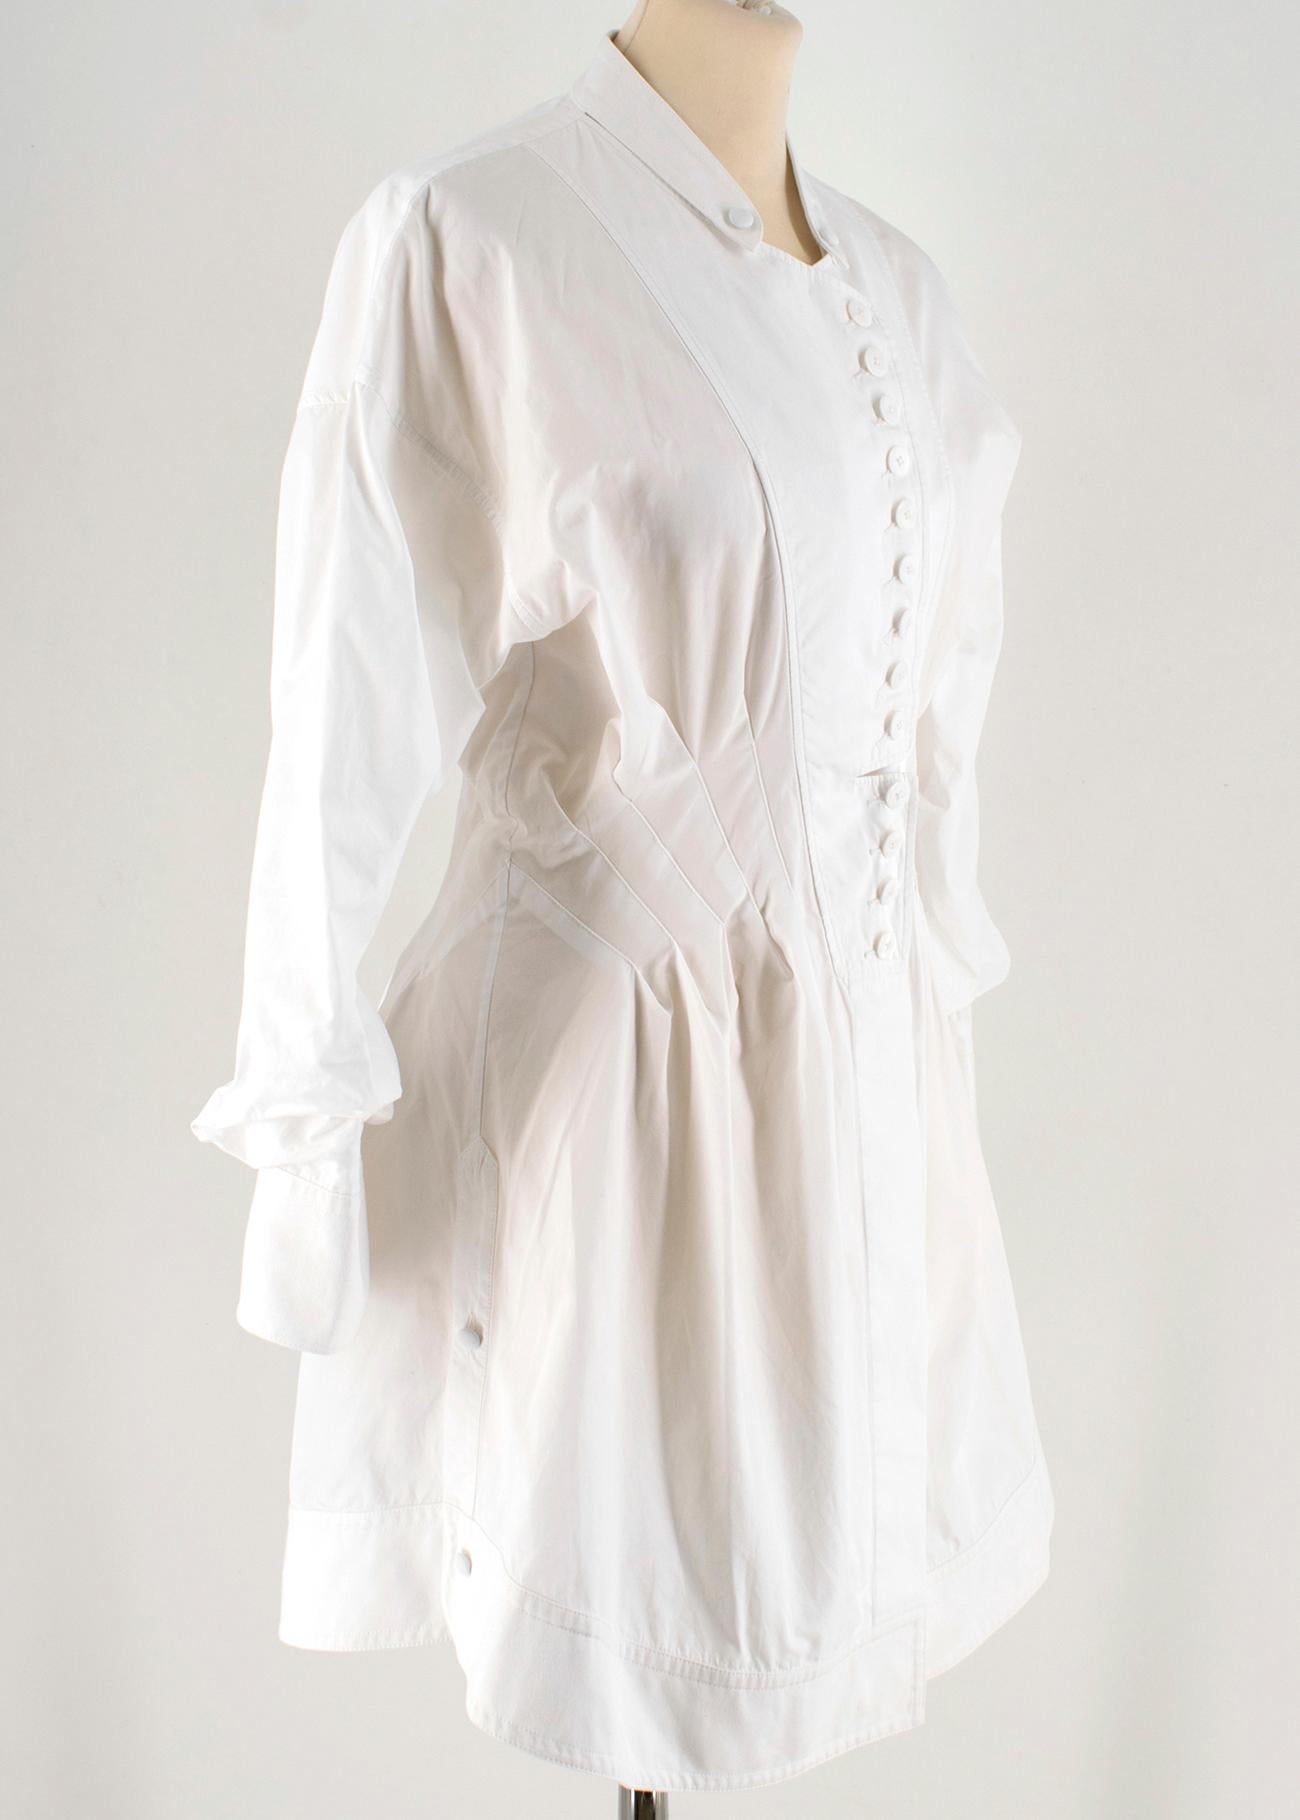 Alexander Wang White Button Down Tunic W/ Mandarin Collar

- white cotton long shirt 
- gathered sleeves
- round neckline 
- button down fastening to the front
- waist accent 

Please note, these items are pre-owned and may show some signs of